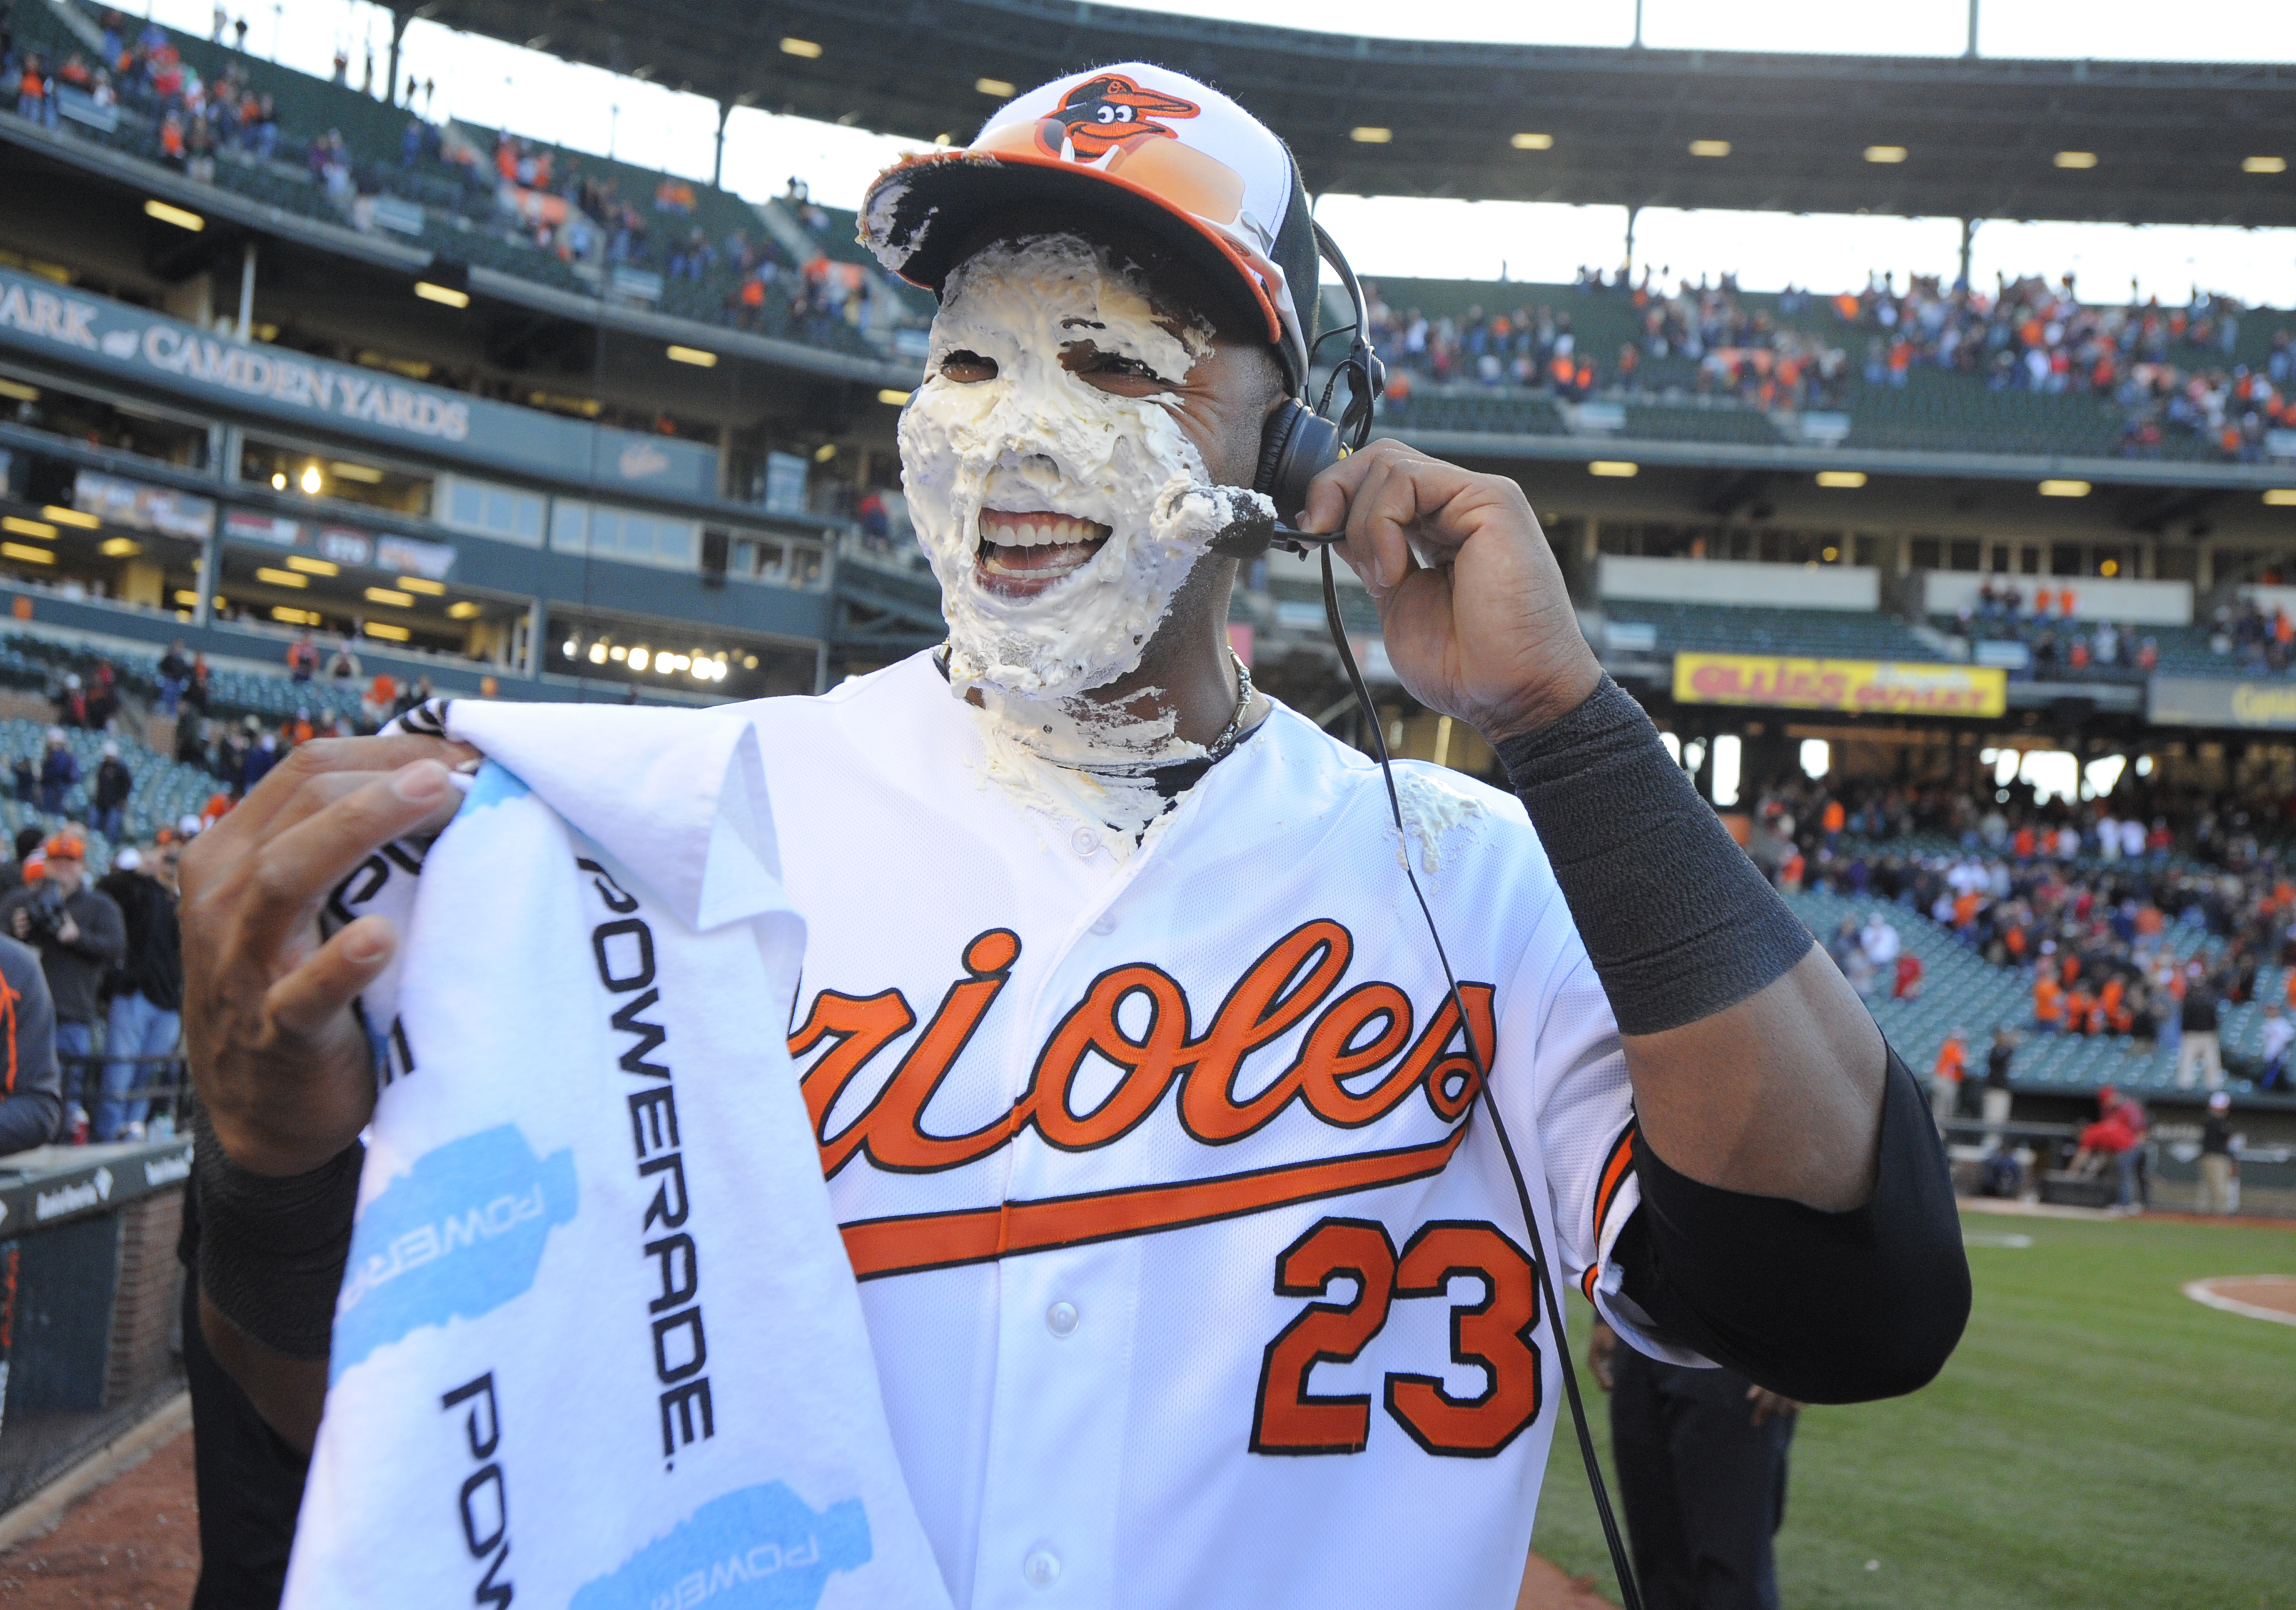 HOME OPENER: Here's how Opening Day looked at Camden Yards!